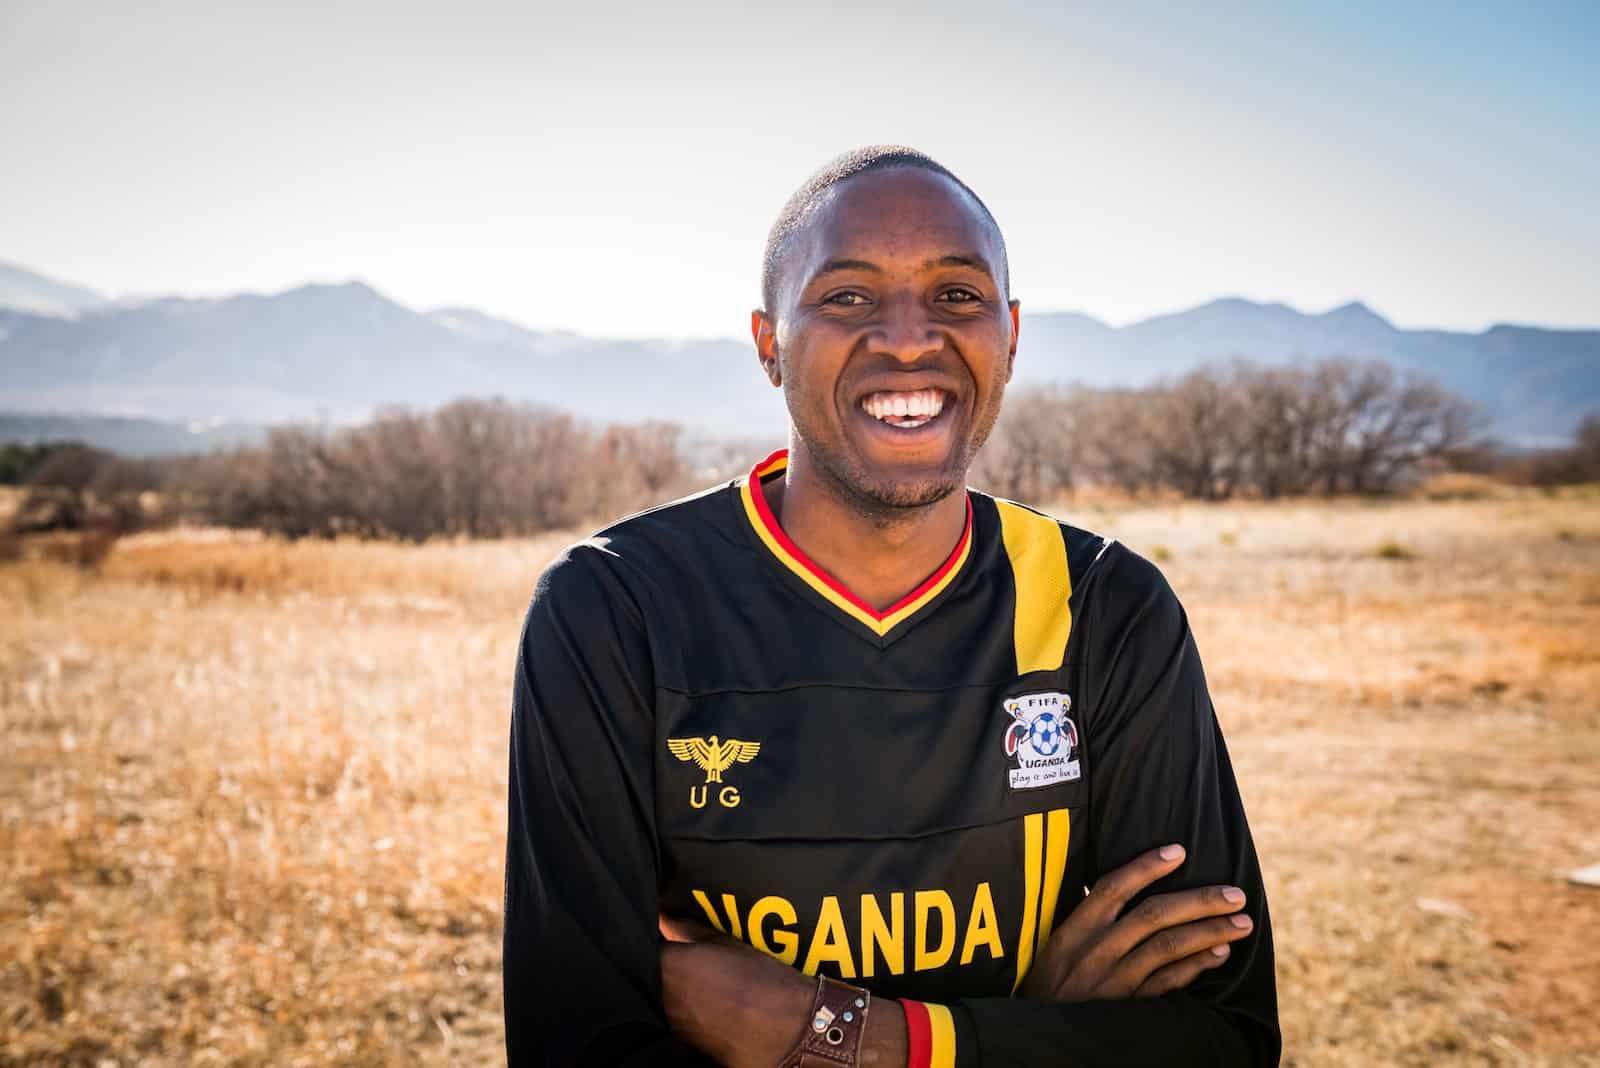 A man wearing a black jersey that says Uganda crosses his arms and smiles. He stands outside with trees and mountains in the distance.